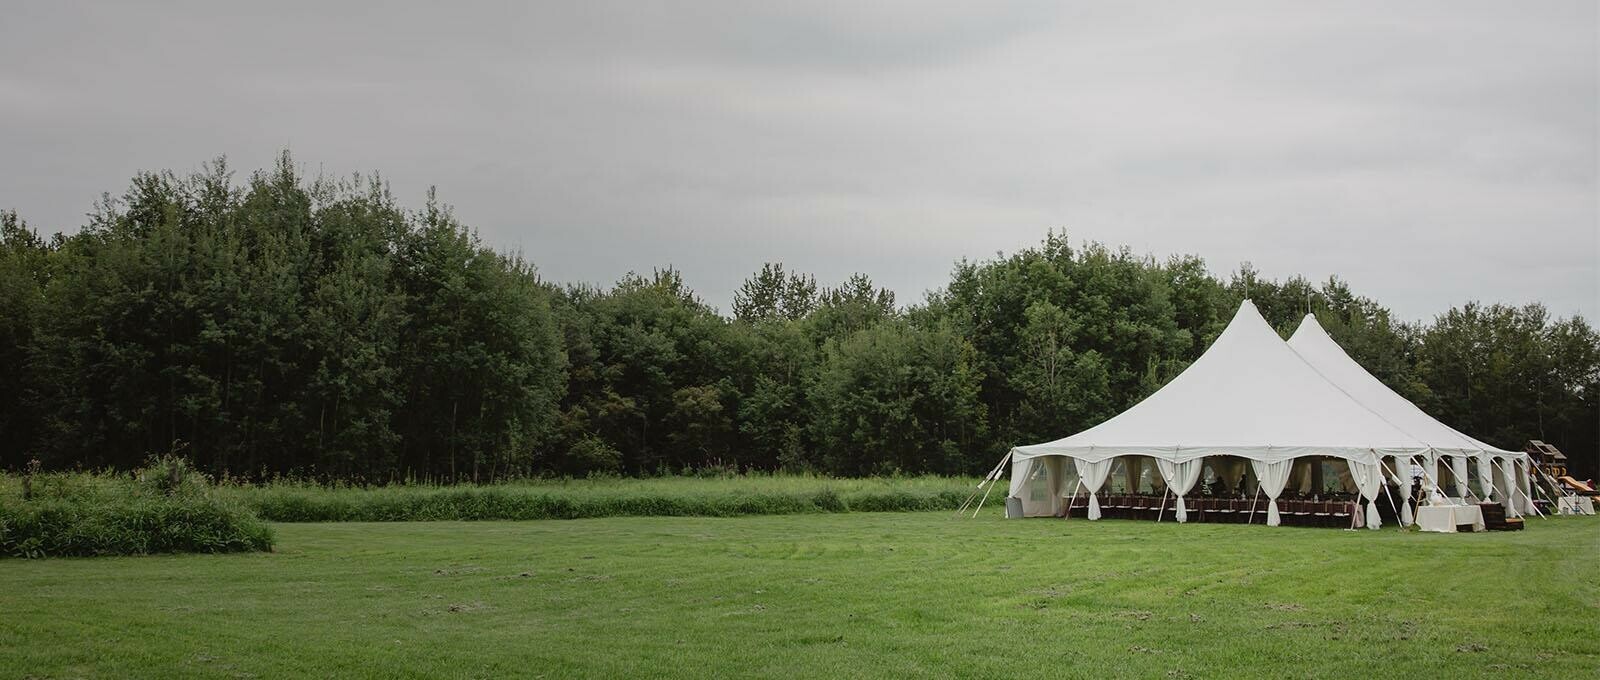 Tent Rentals Calgary featuring a white Pole Pent on a grassy field for a wedding reception.